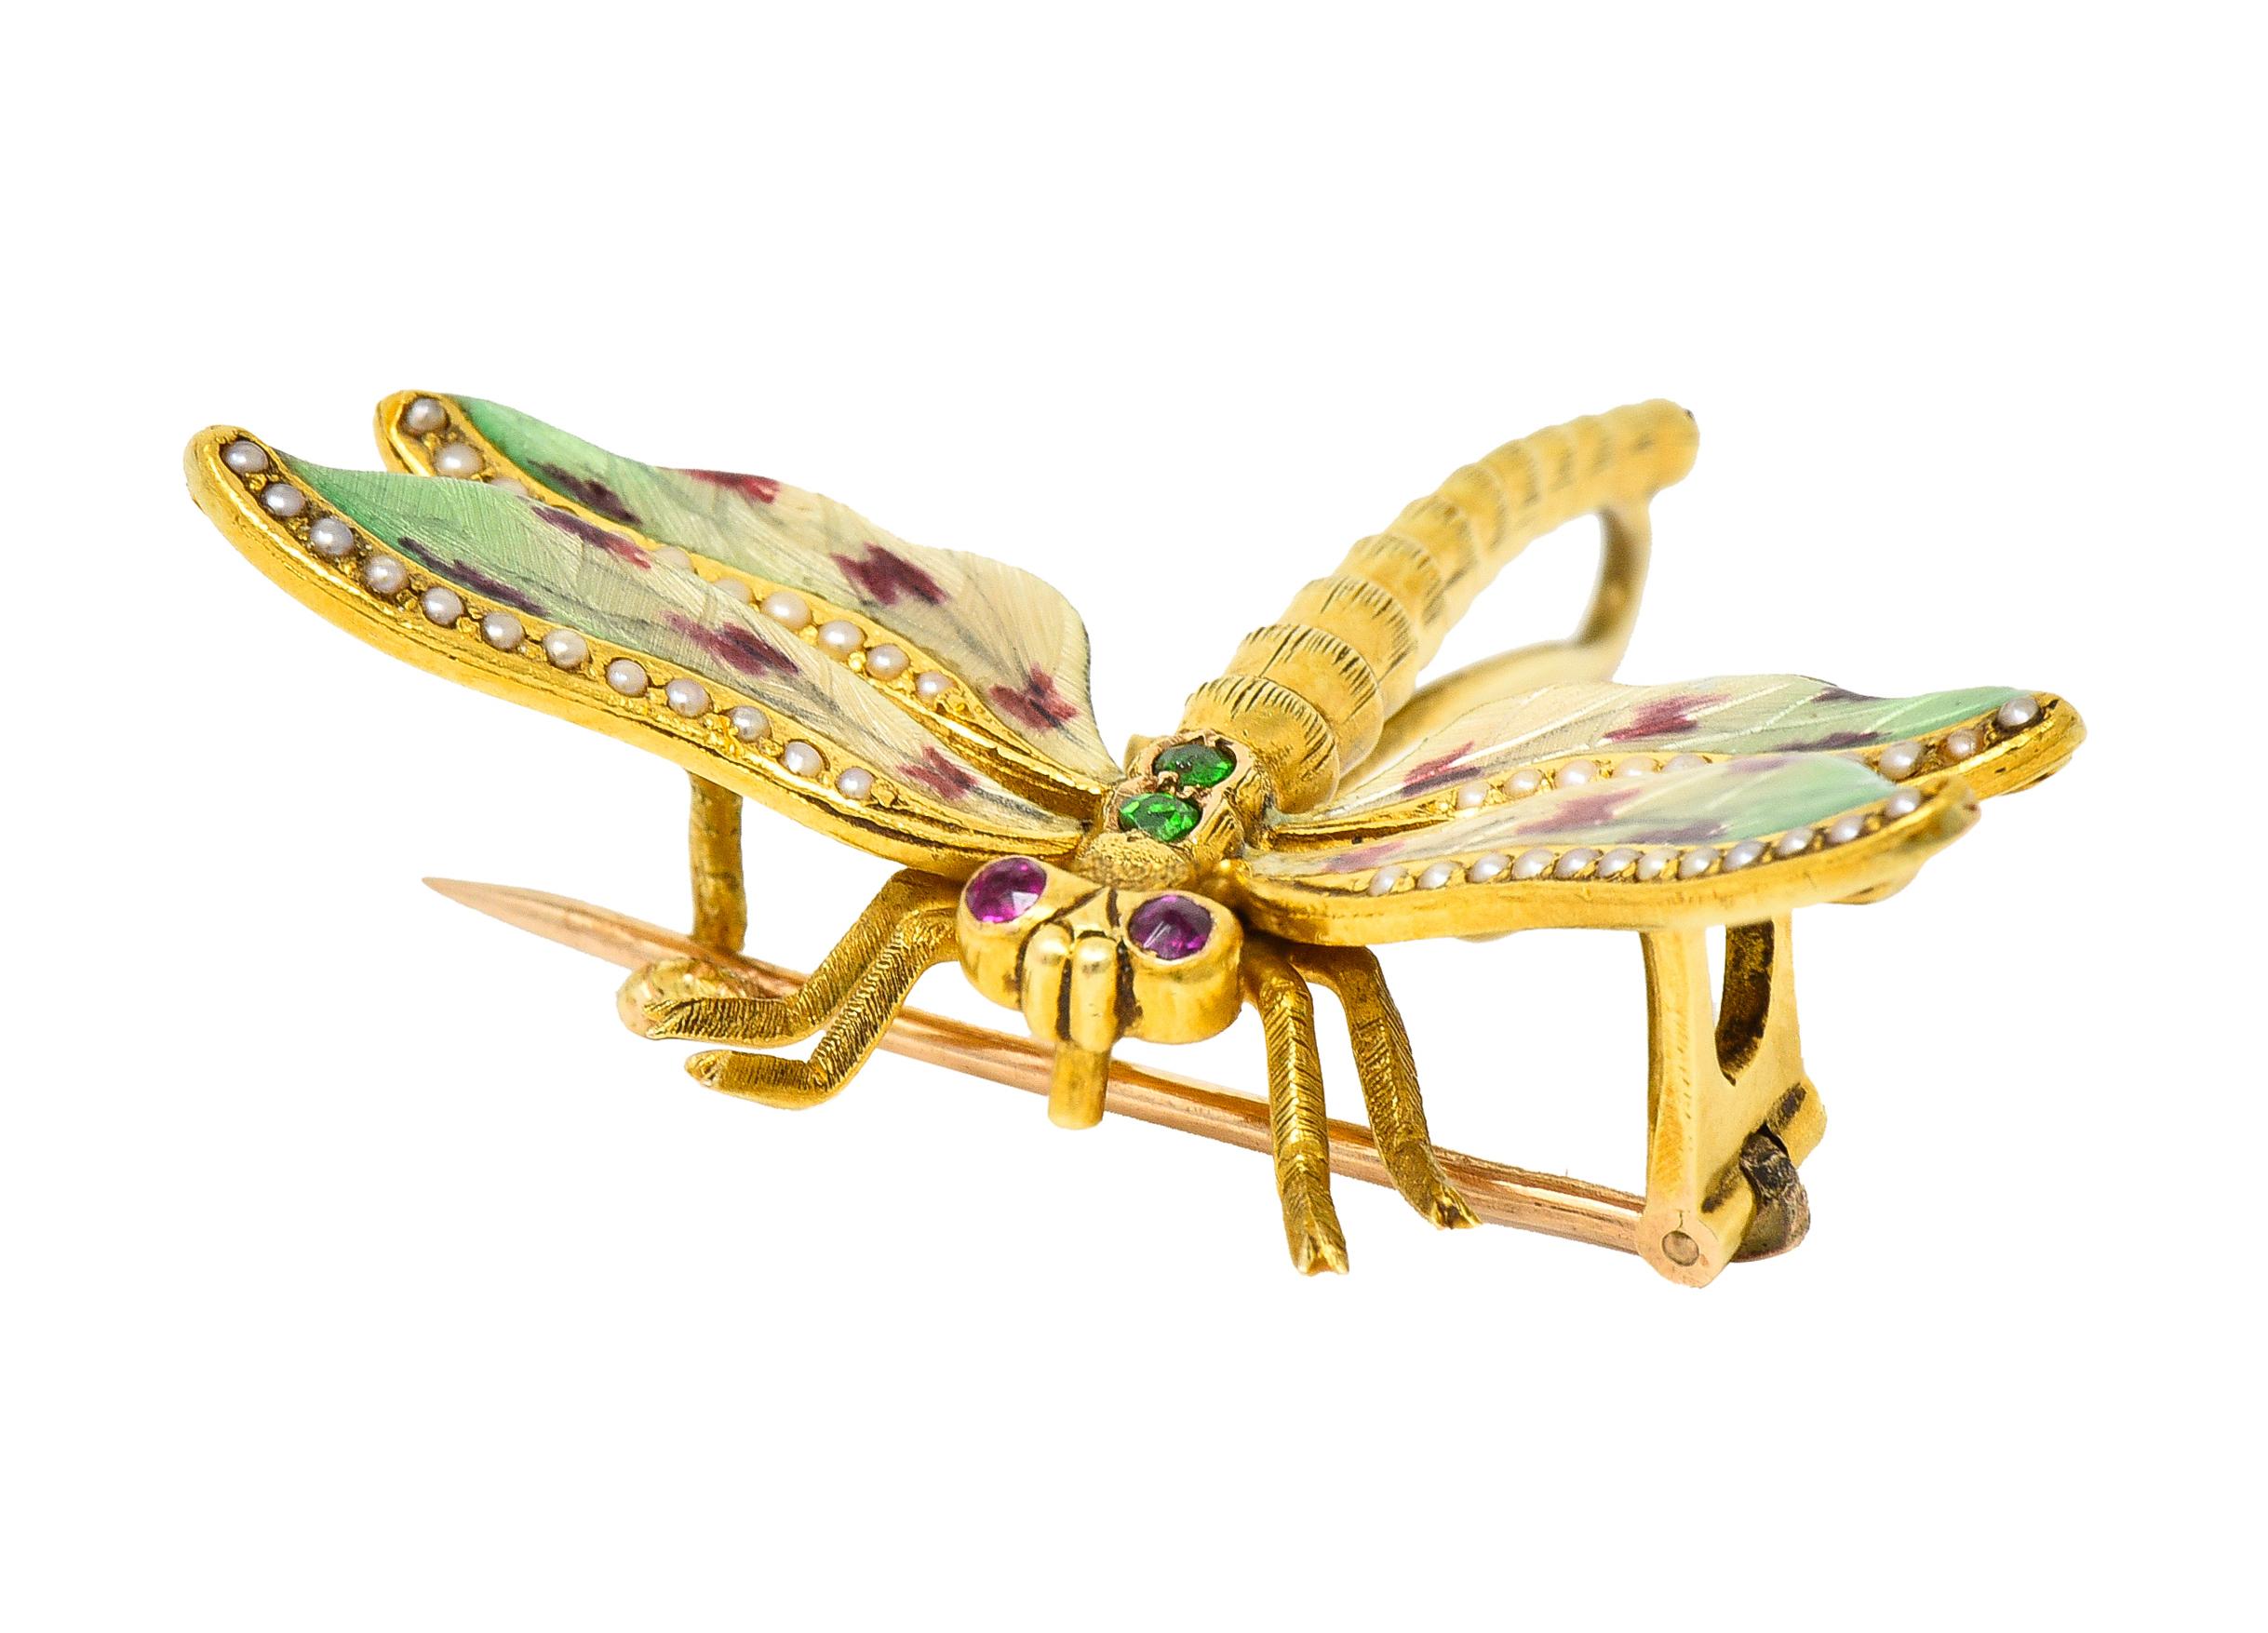 Designed a dragonfly with a segmented gold body and four basse-taille enamel wings. Transparent red, green, and yellow glossy enamel over linear vein-like engraving. Exhibiting minimal loss - accented by 1.0 mm round seed pearls. Bead set in edges